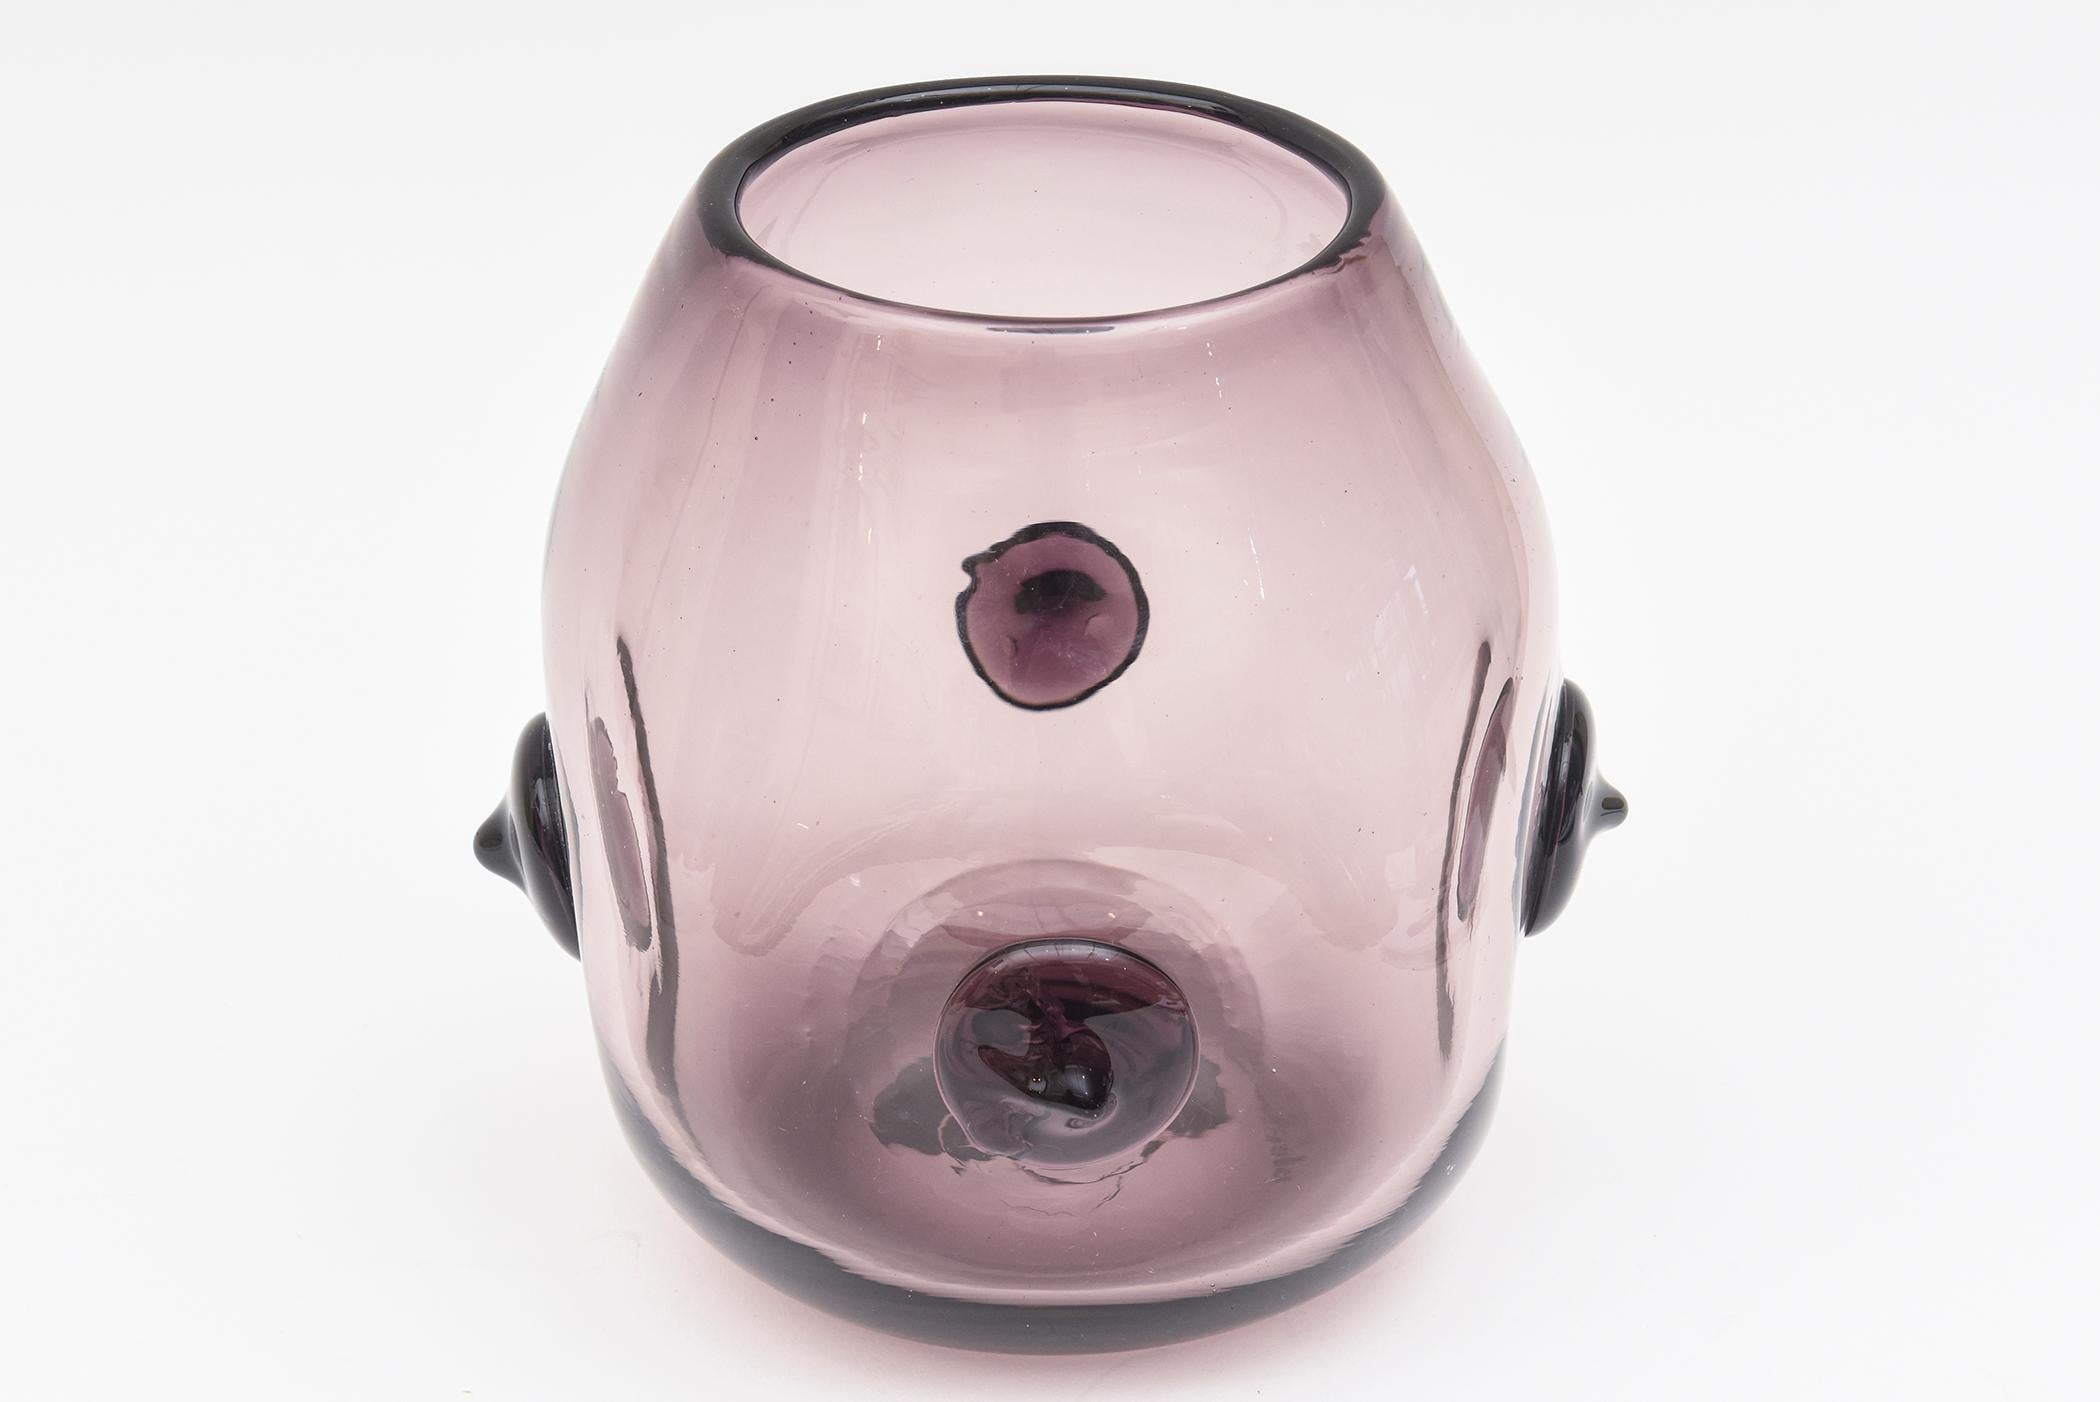 This rare and obscure signed Blenko vase or vessel is a luscious color of light purple. It was designed by Wayne Husted for Blenko and was most likely an experimental piece which makes it even more rare. It has 4 nipple like protrusions surround. It